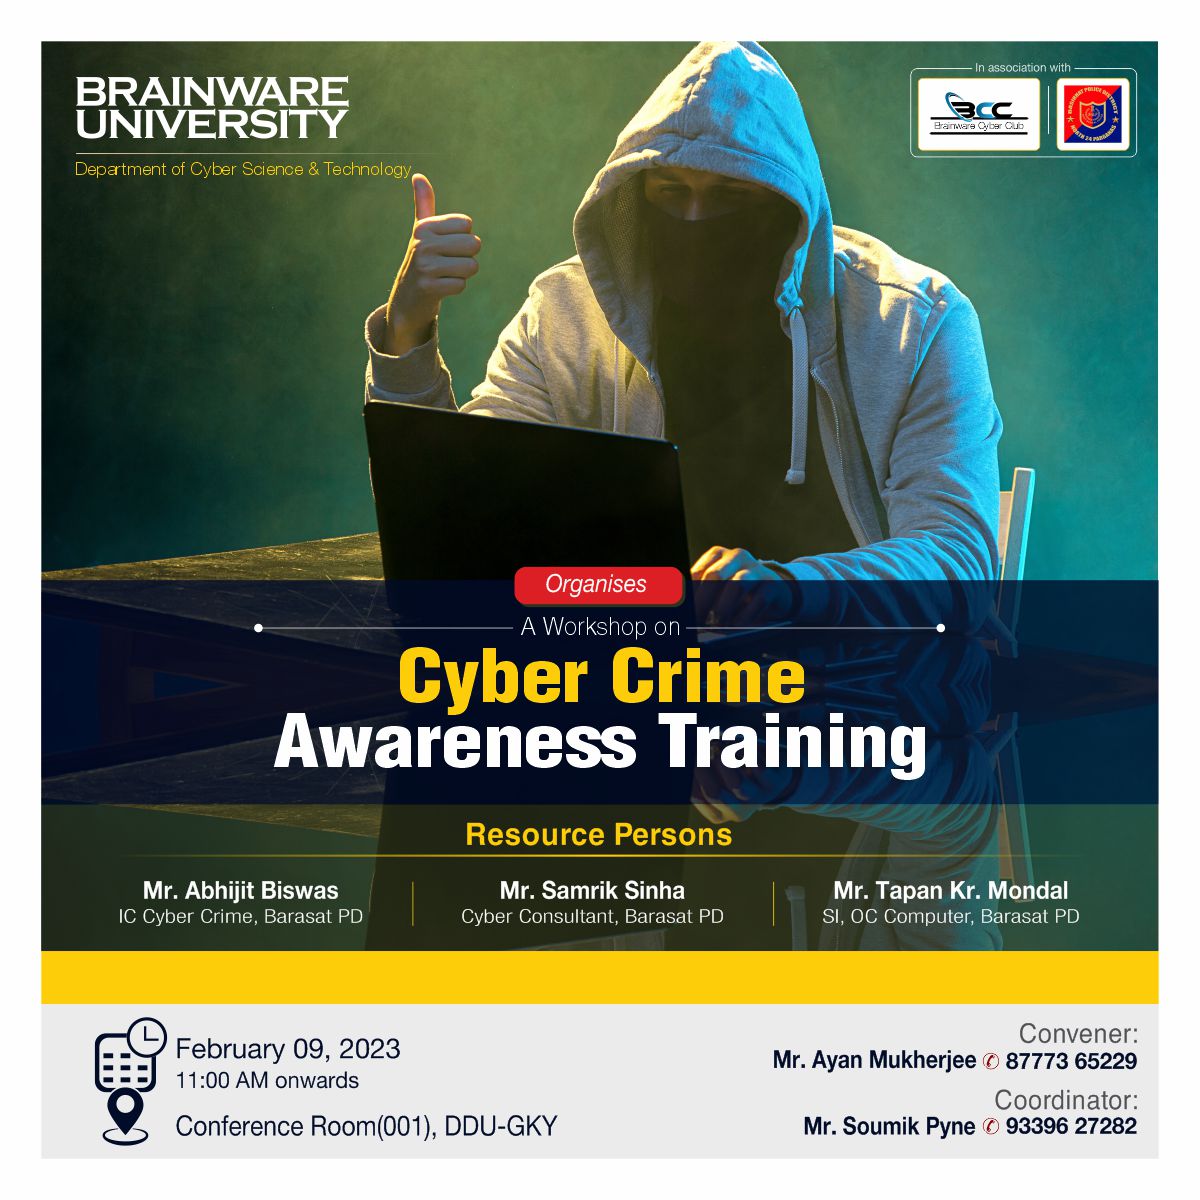 Workshop on 'Cyber Crime Awareness Training' to take place on February 9
.
.
.
.
#databreaches #cyberattacks #cybersecurityawareness #securityawareness #awarenesstraining #training #awareness #brainwareuniversity #brainware